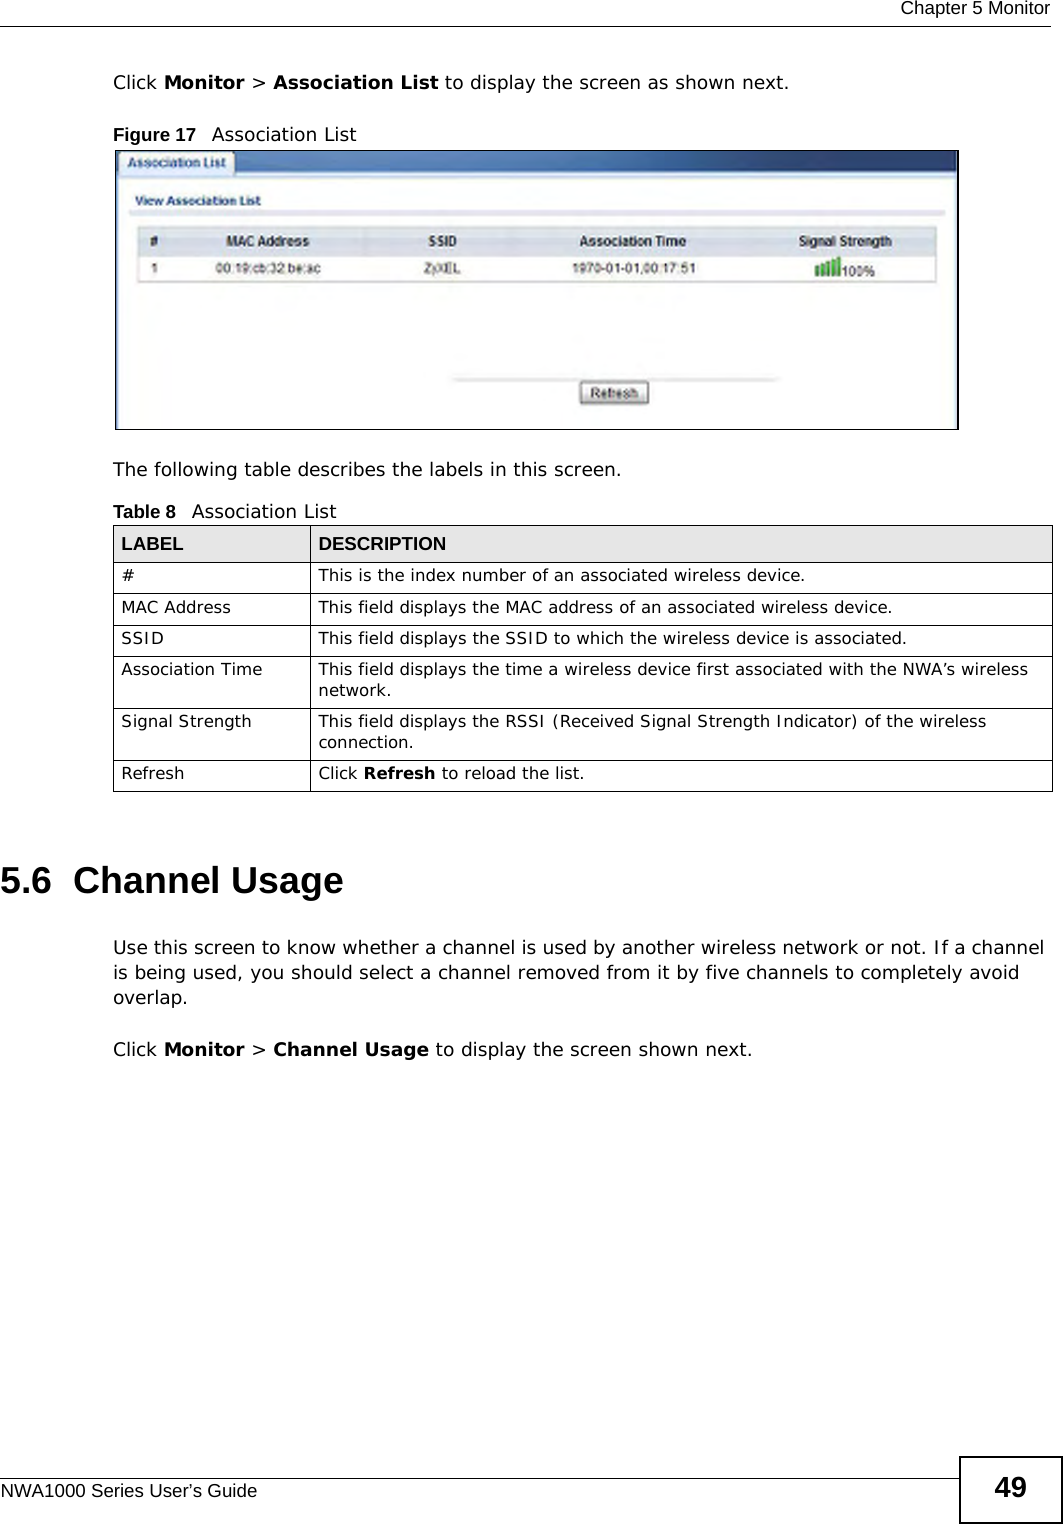  Chapter 5 MonitorNWA1000 Series User’s Guide 49Click Monitor &gt; Association List to display the screen as shown next.Figure 17   Association ListThe following table describes the labels in this screen.5.6  Channel UsageUse this screen to know whether a channel is used by another wireless network or not. If a channel is being used, you should select a channel removed from it by five channels to completely avoid overlap. Click Monitor &gt; Channel Usage to display the screen shown next.Table 8   Association ListLABEL DESCRIPTION#This is the index number of an associated wireless device.MAC Address This field displays the MAC address of an associated wireless device.SSID This field displays the SSID to which the wireless device is associated.Association Time This field displays the time a wireless device first associated with the NWA’s wireless network.Signal Strength This field displays the RSSI (Received Signal Strength Indicator) of the wireless connection.Refresh Click Refresh to reload the list. 